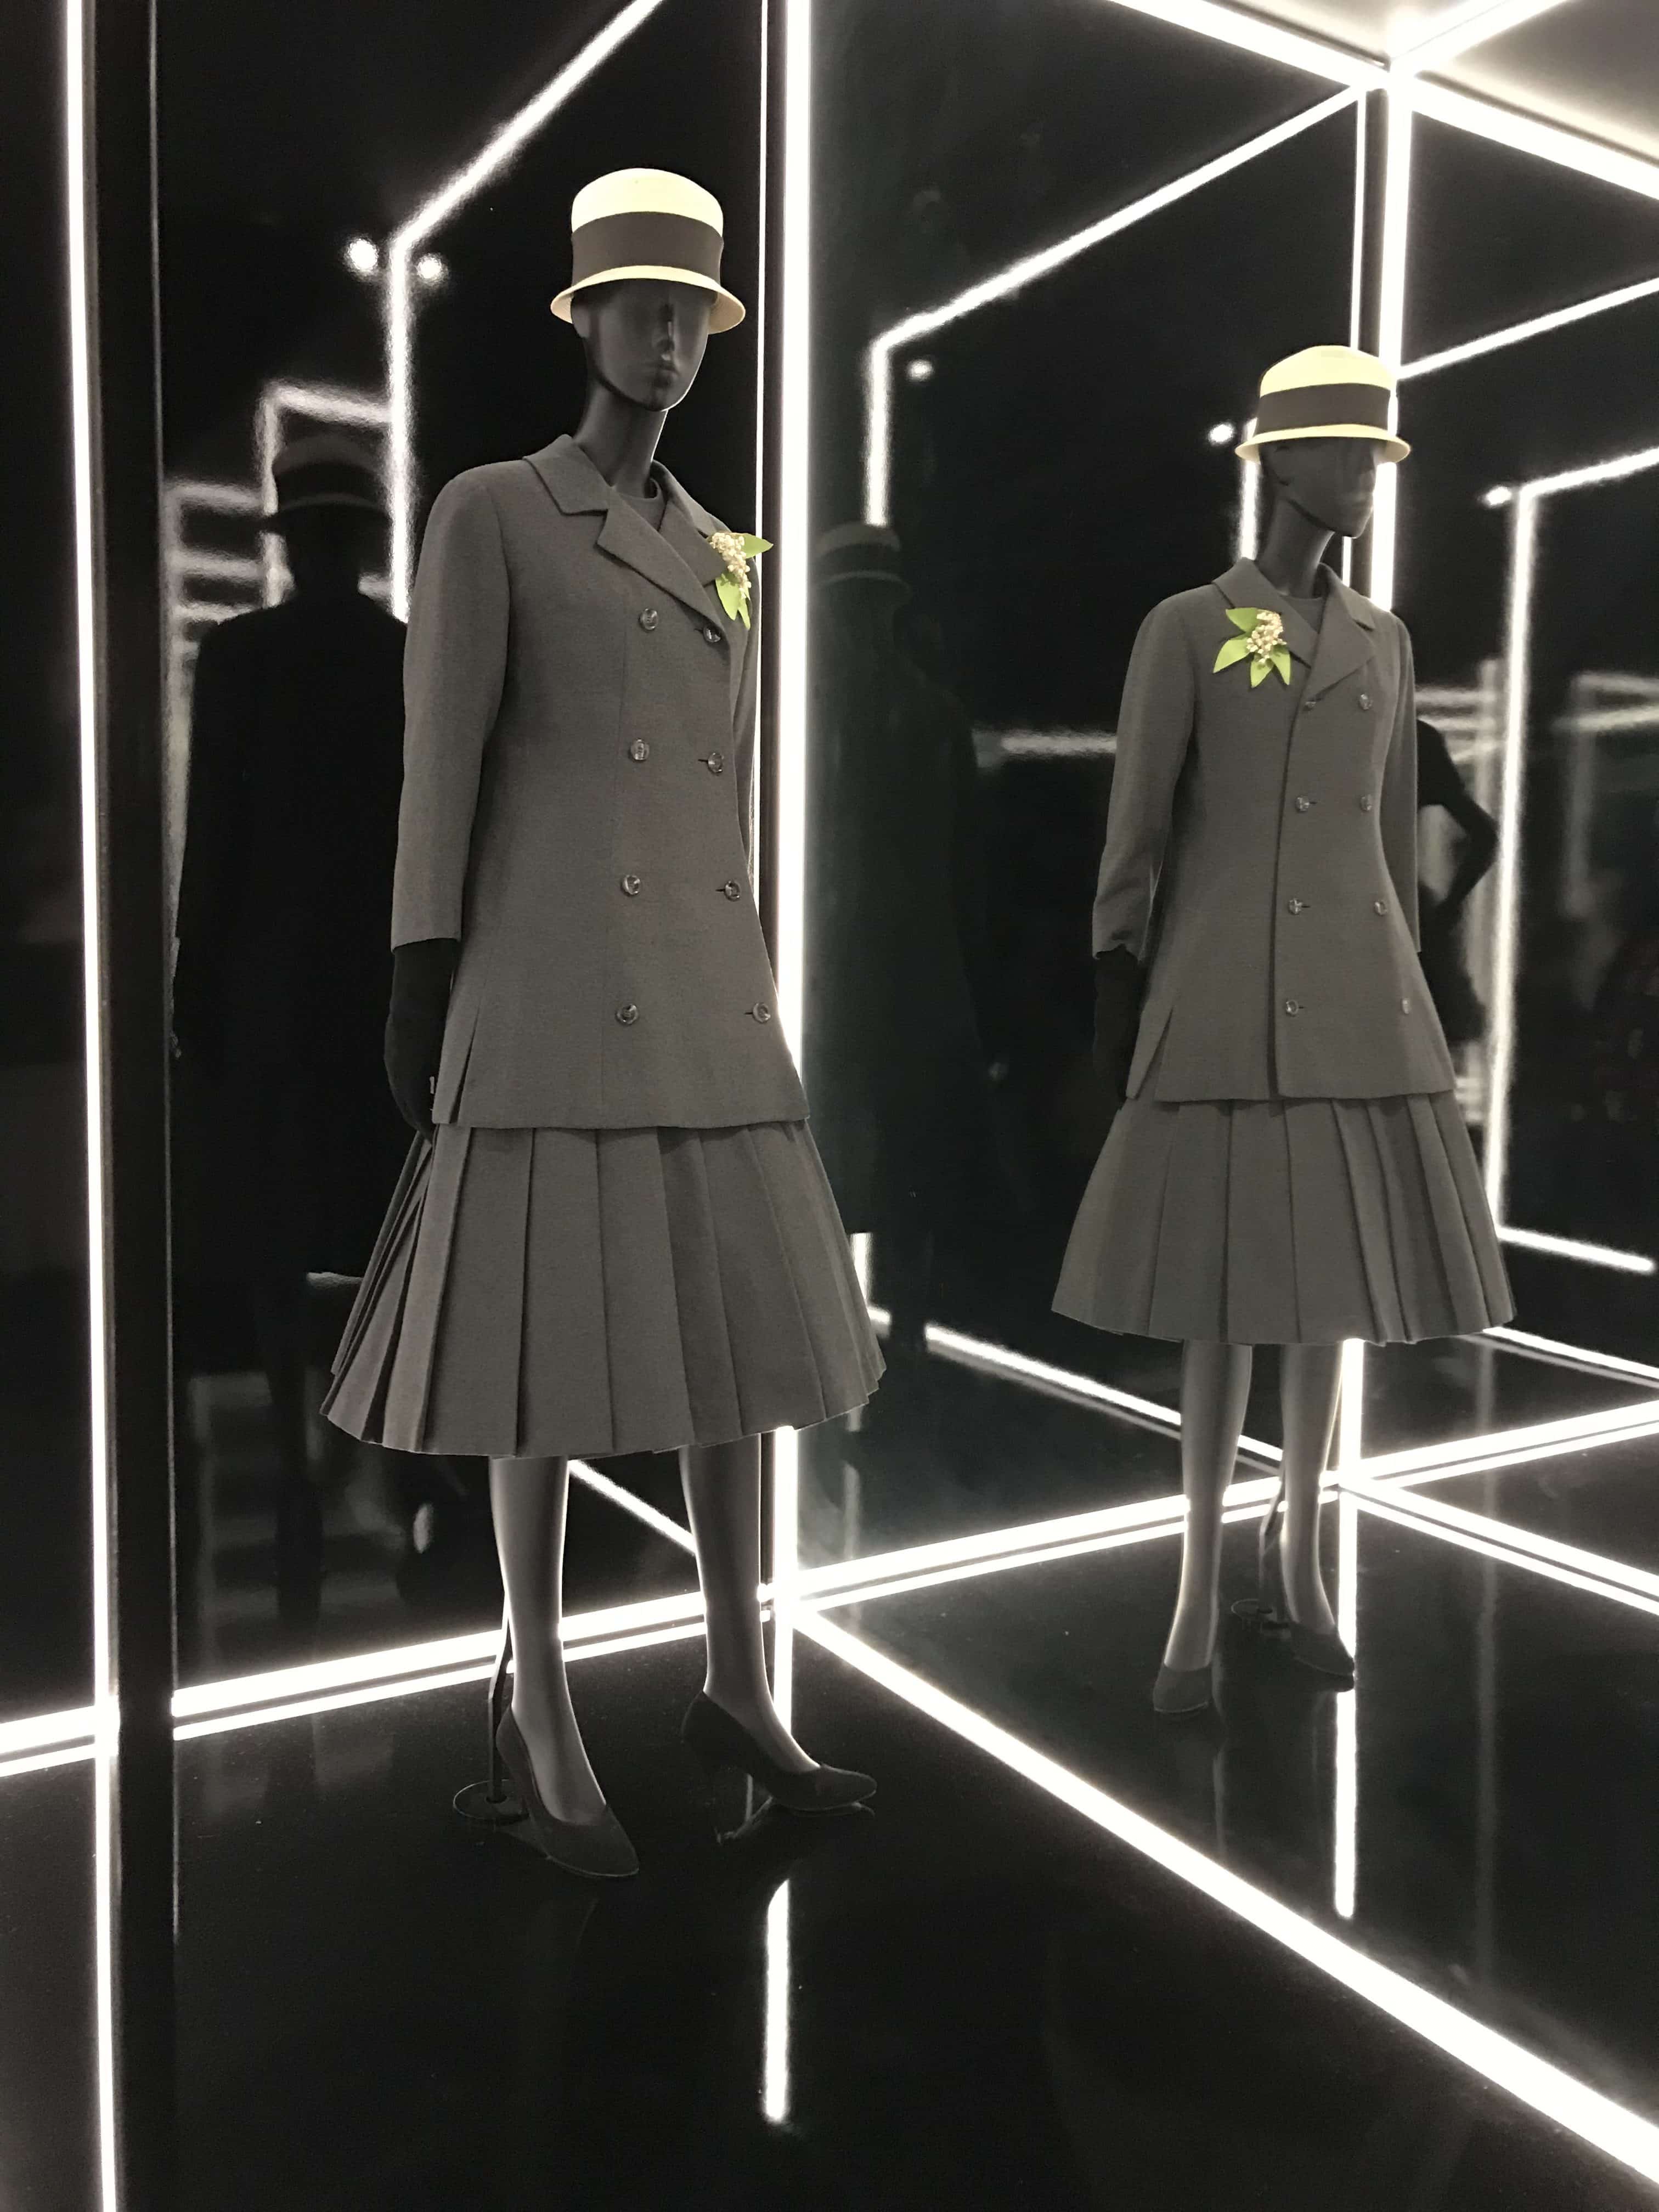 The Christian Dior Designer of Dreams Exhibition at the V&A. The A Suit by Dior.